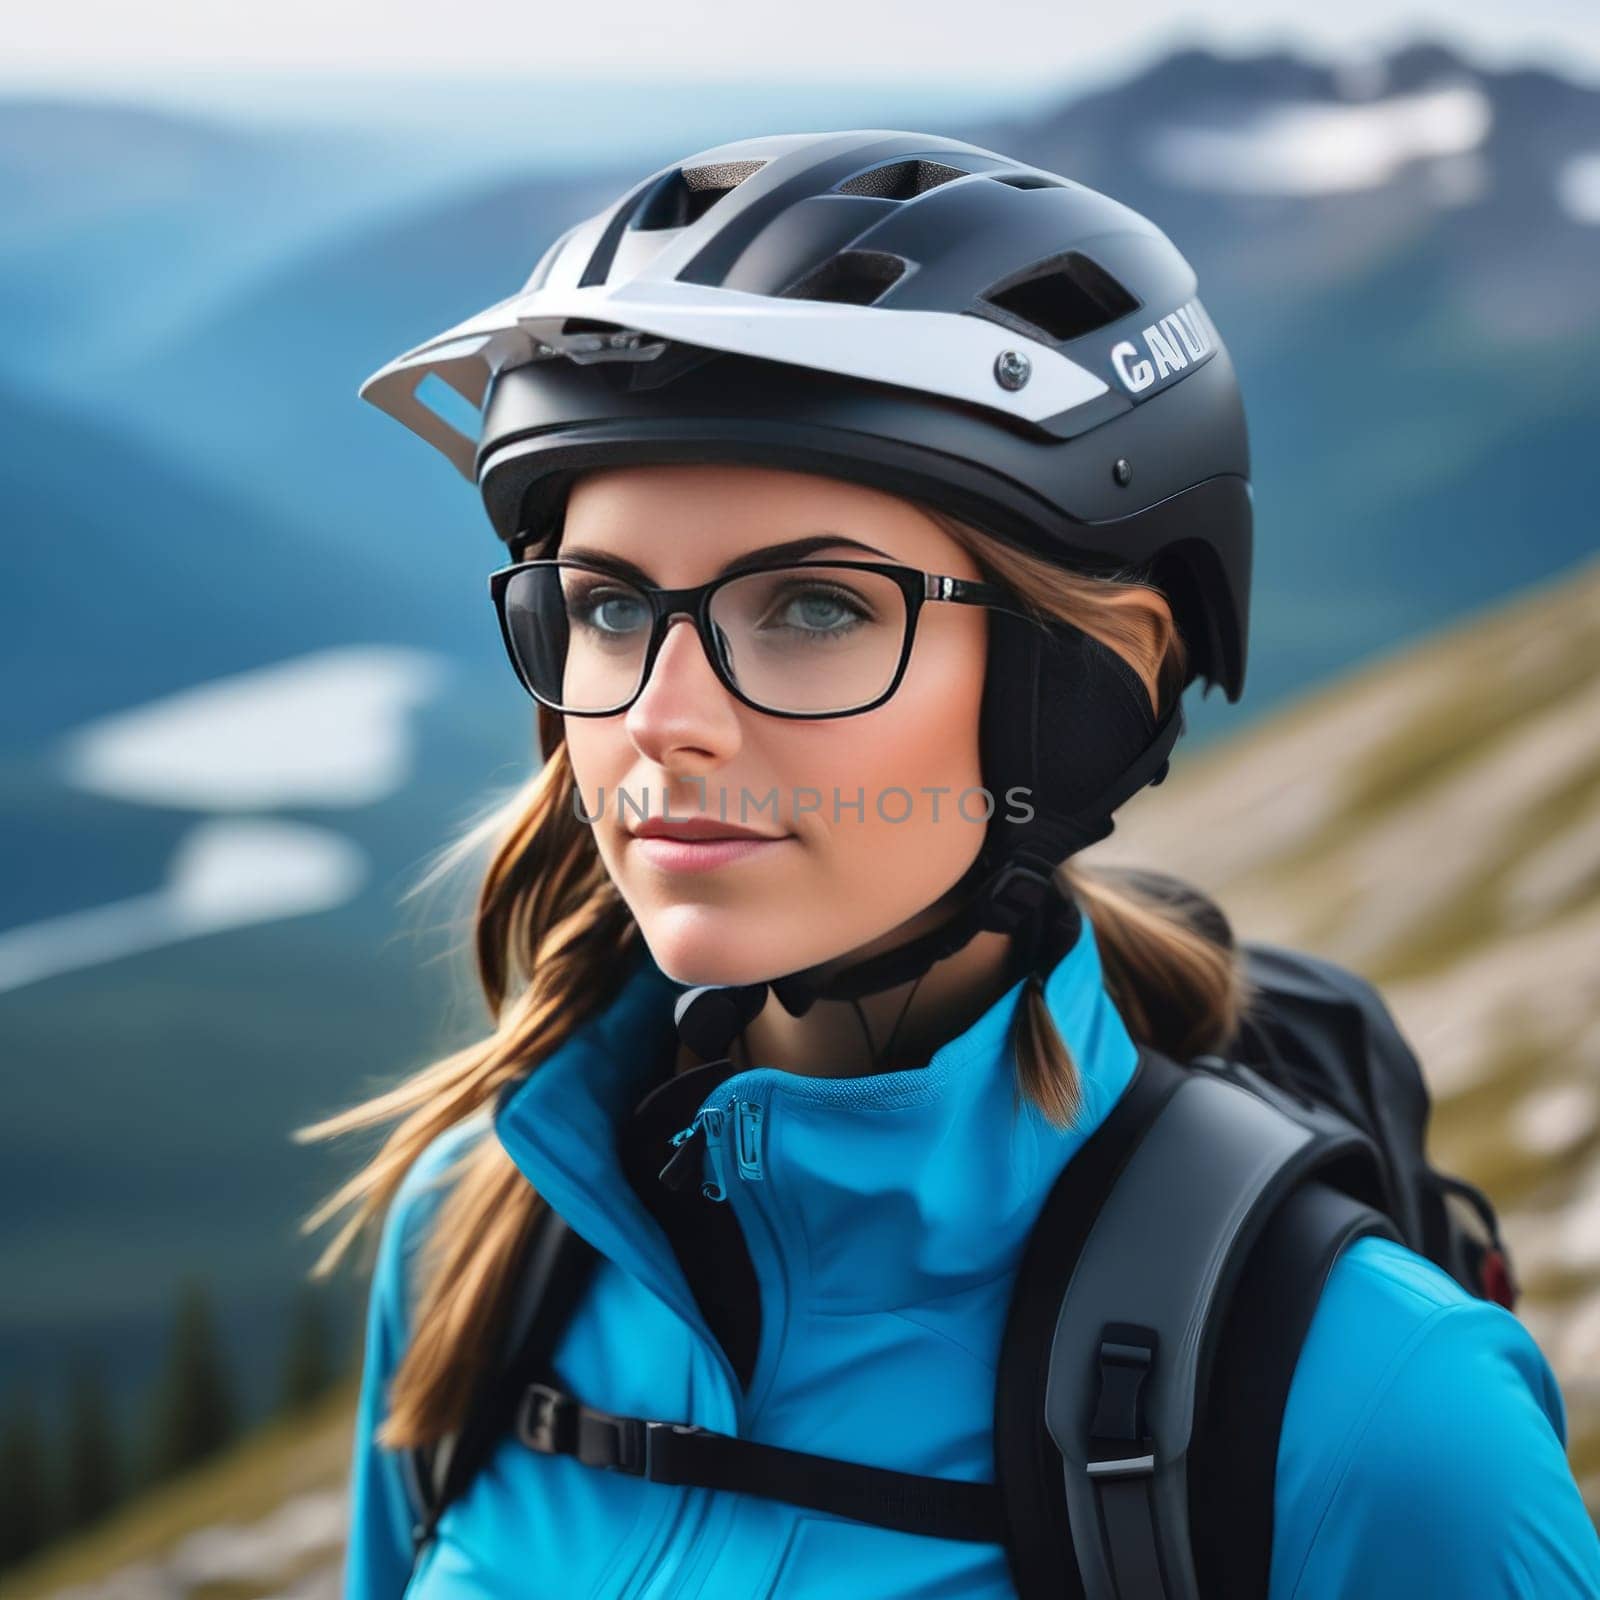 Woman wearing helmet and glasses stands confidently before towering mountain backdrop ready for adventure and exploration.She may be gearing up for bicycle ride or some other outdoor activity. by Angelsmoon